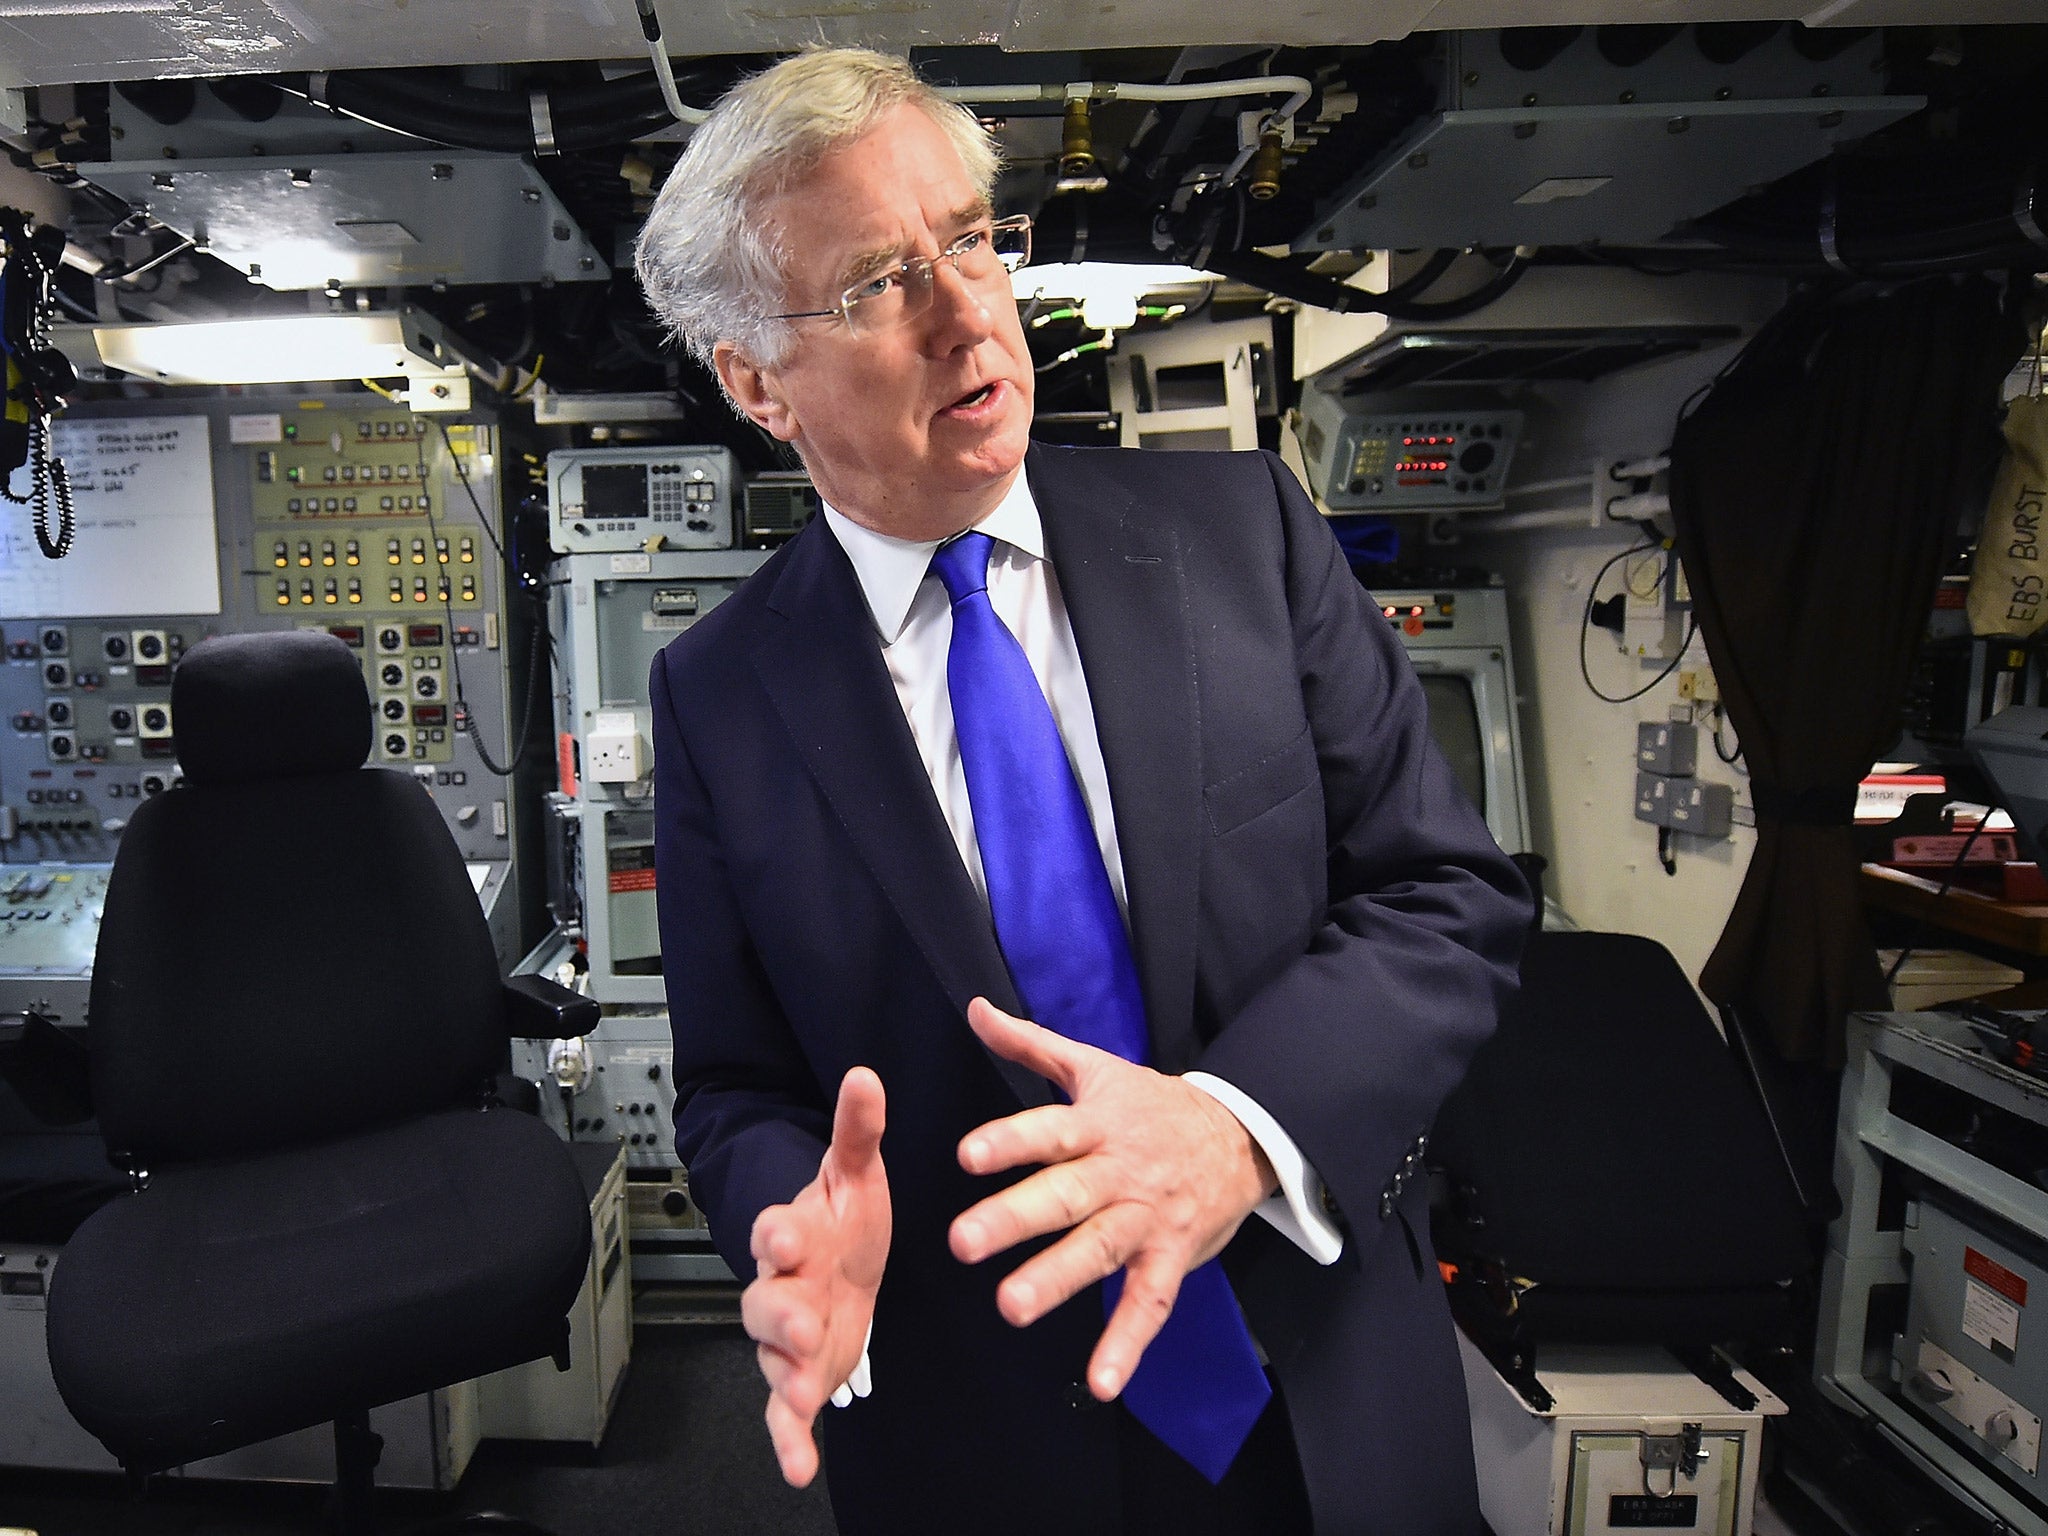 Michael Fallon, the Defence Secretary, will call for more Muslims to join the Armed Forces